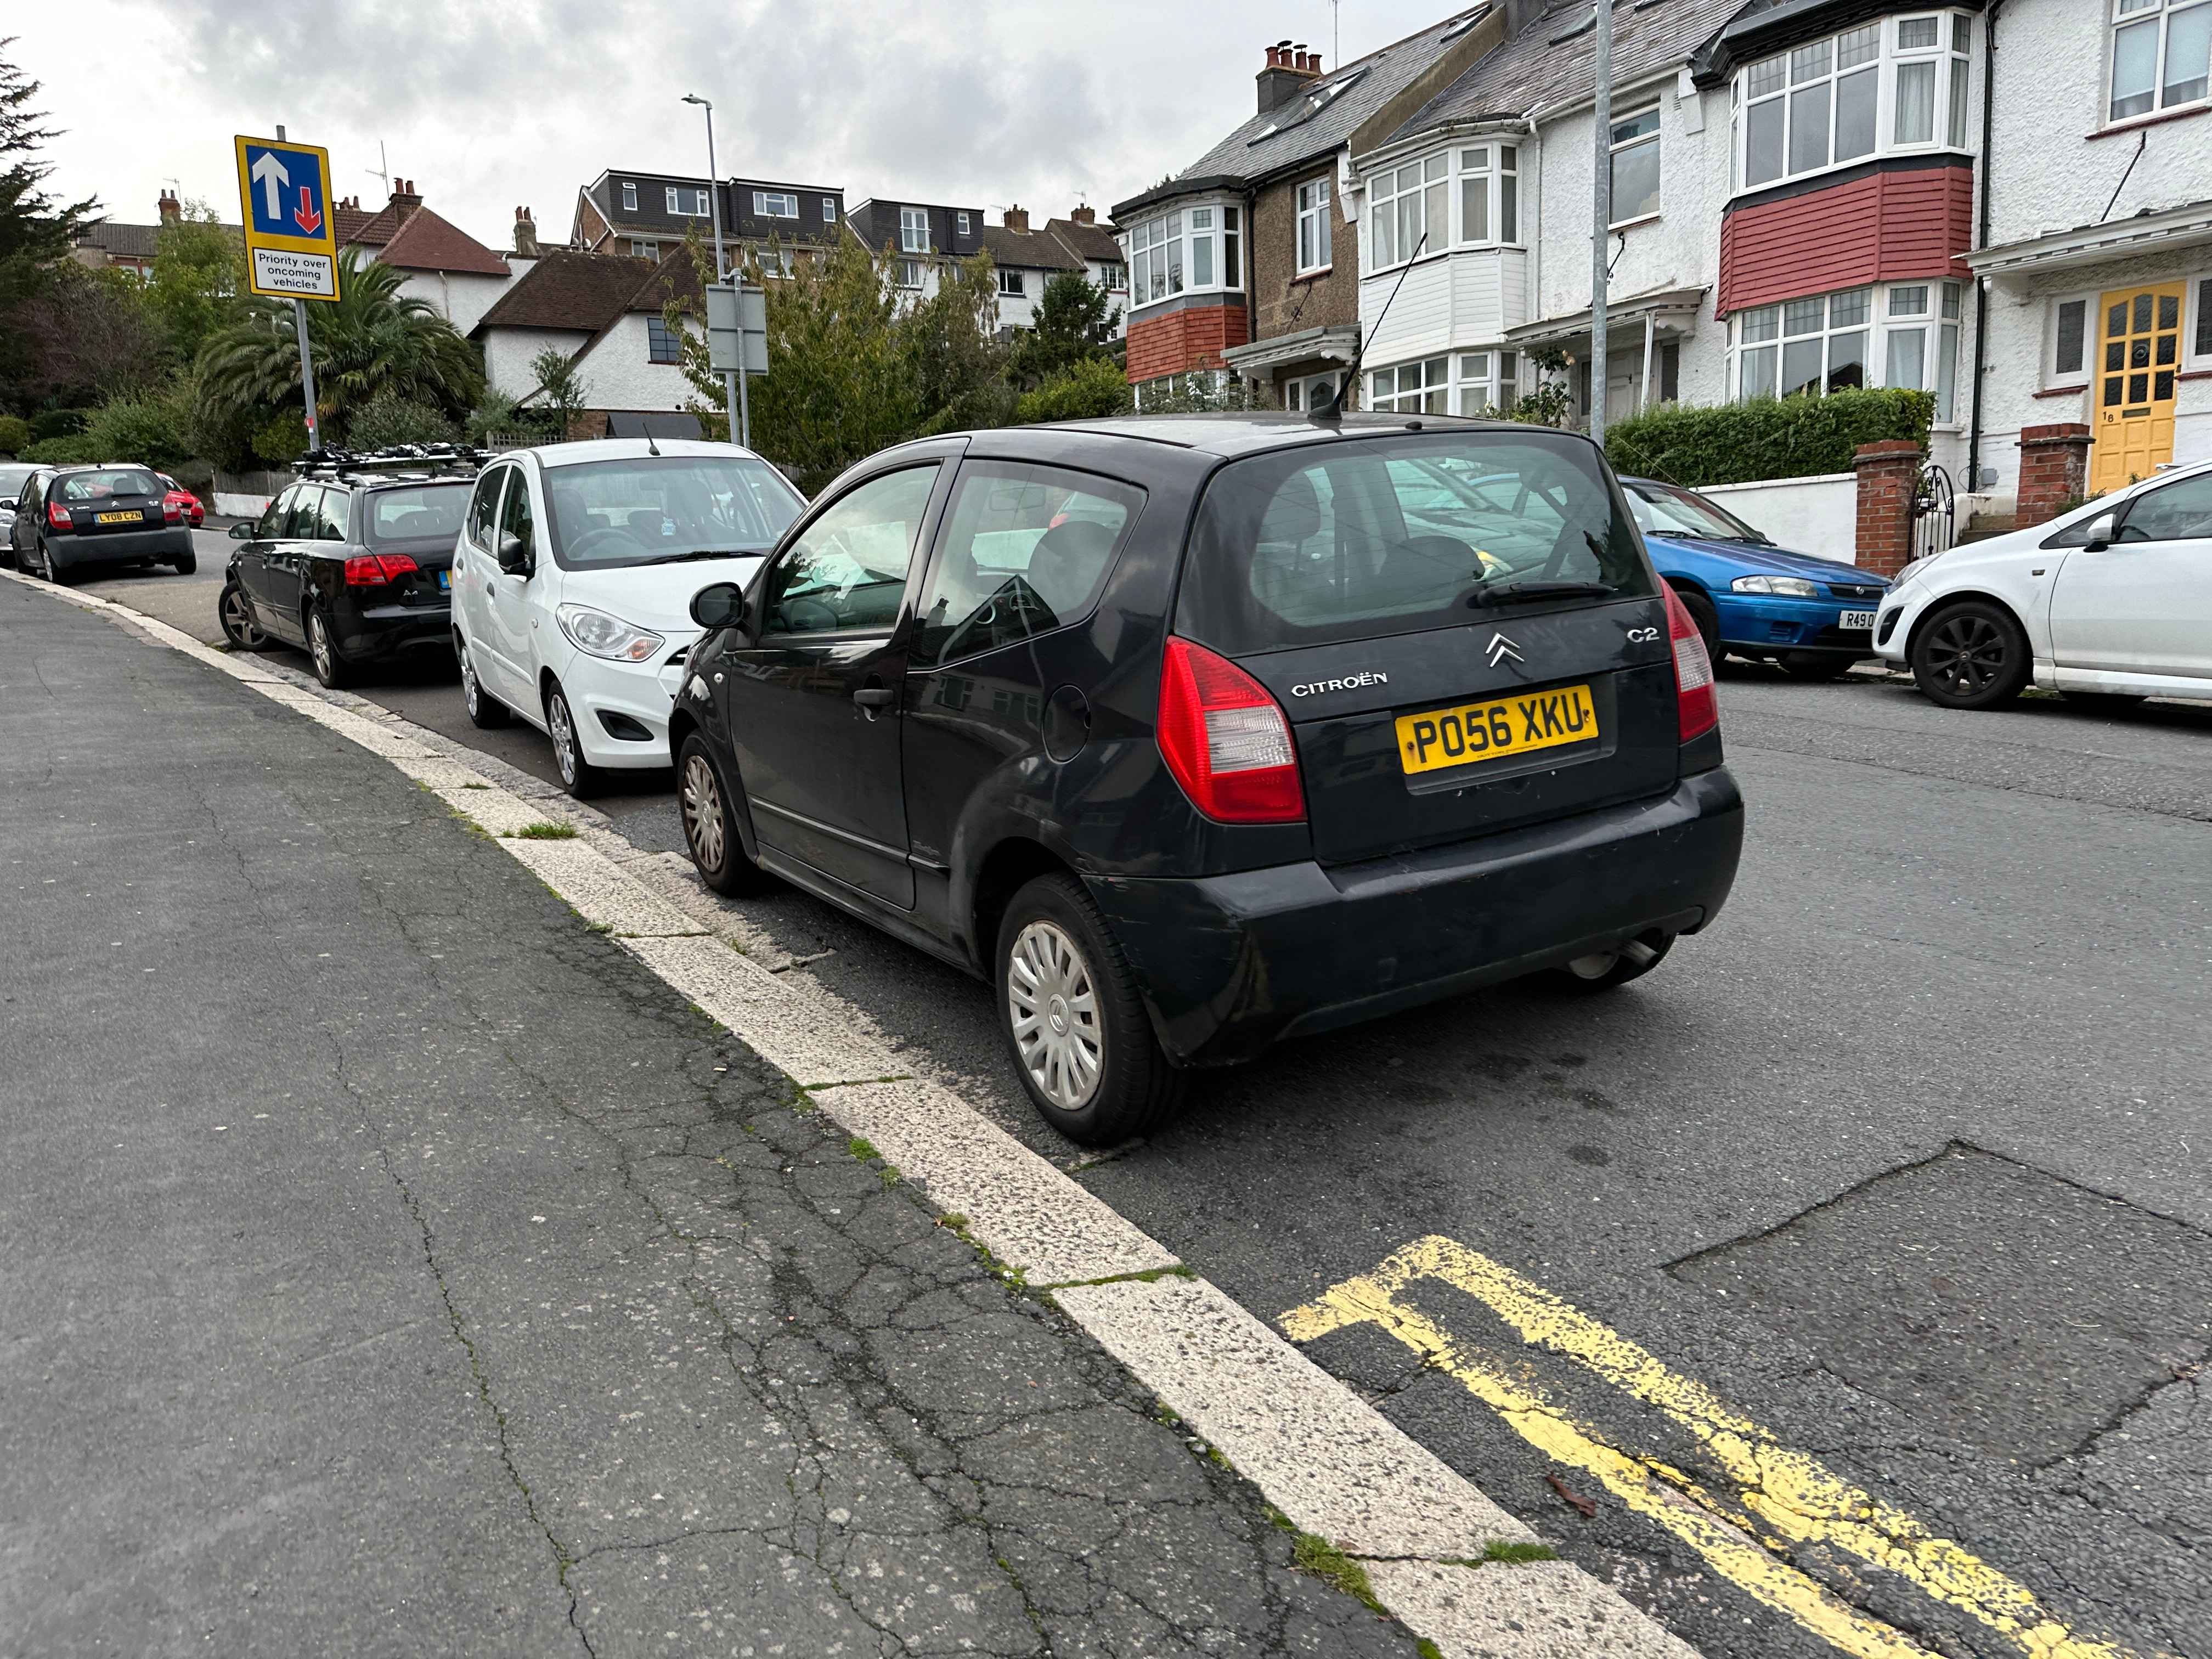 Photograph of PO56 XKU - a Black Citroen C2 parked in Hollingdean by a non-resident. The fifth of five photographs supplied by the residents of Hollingdean.